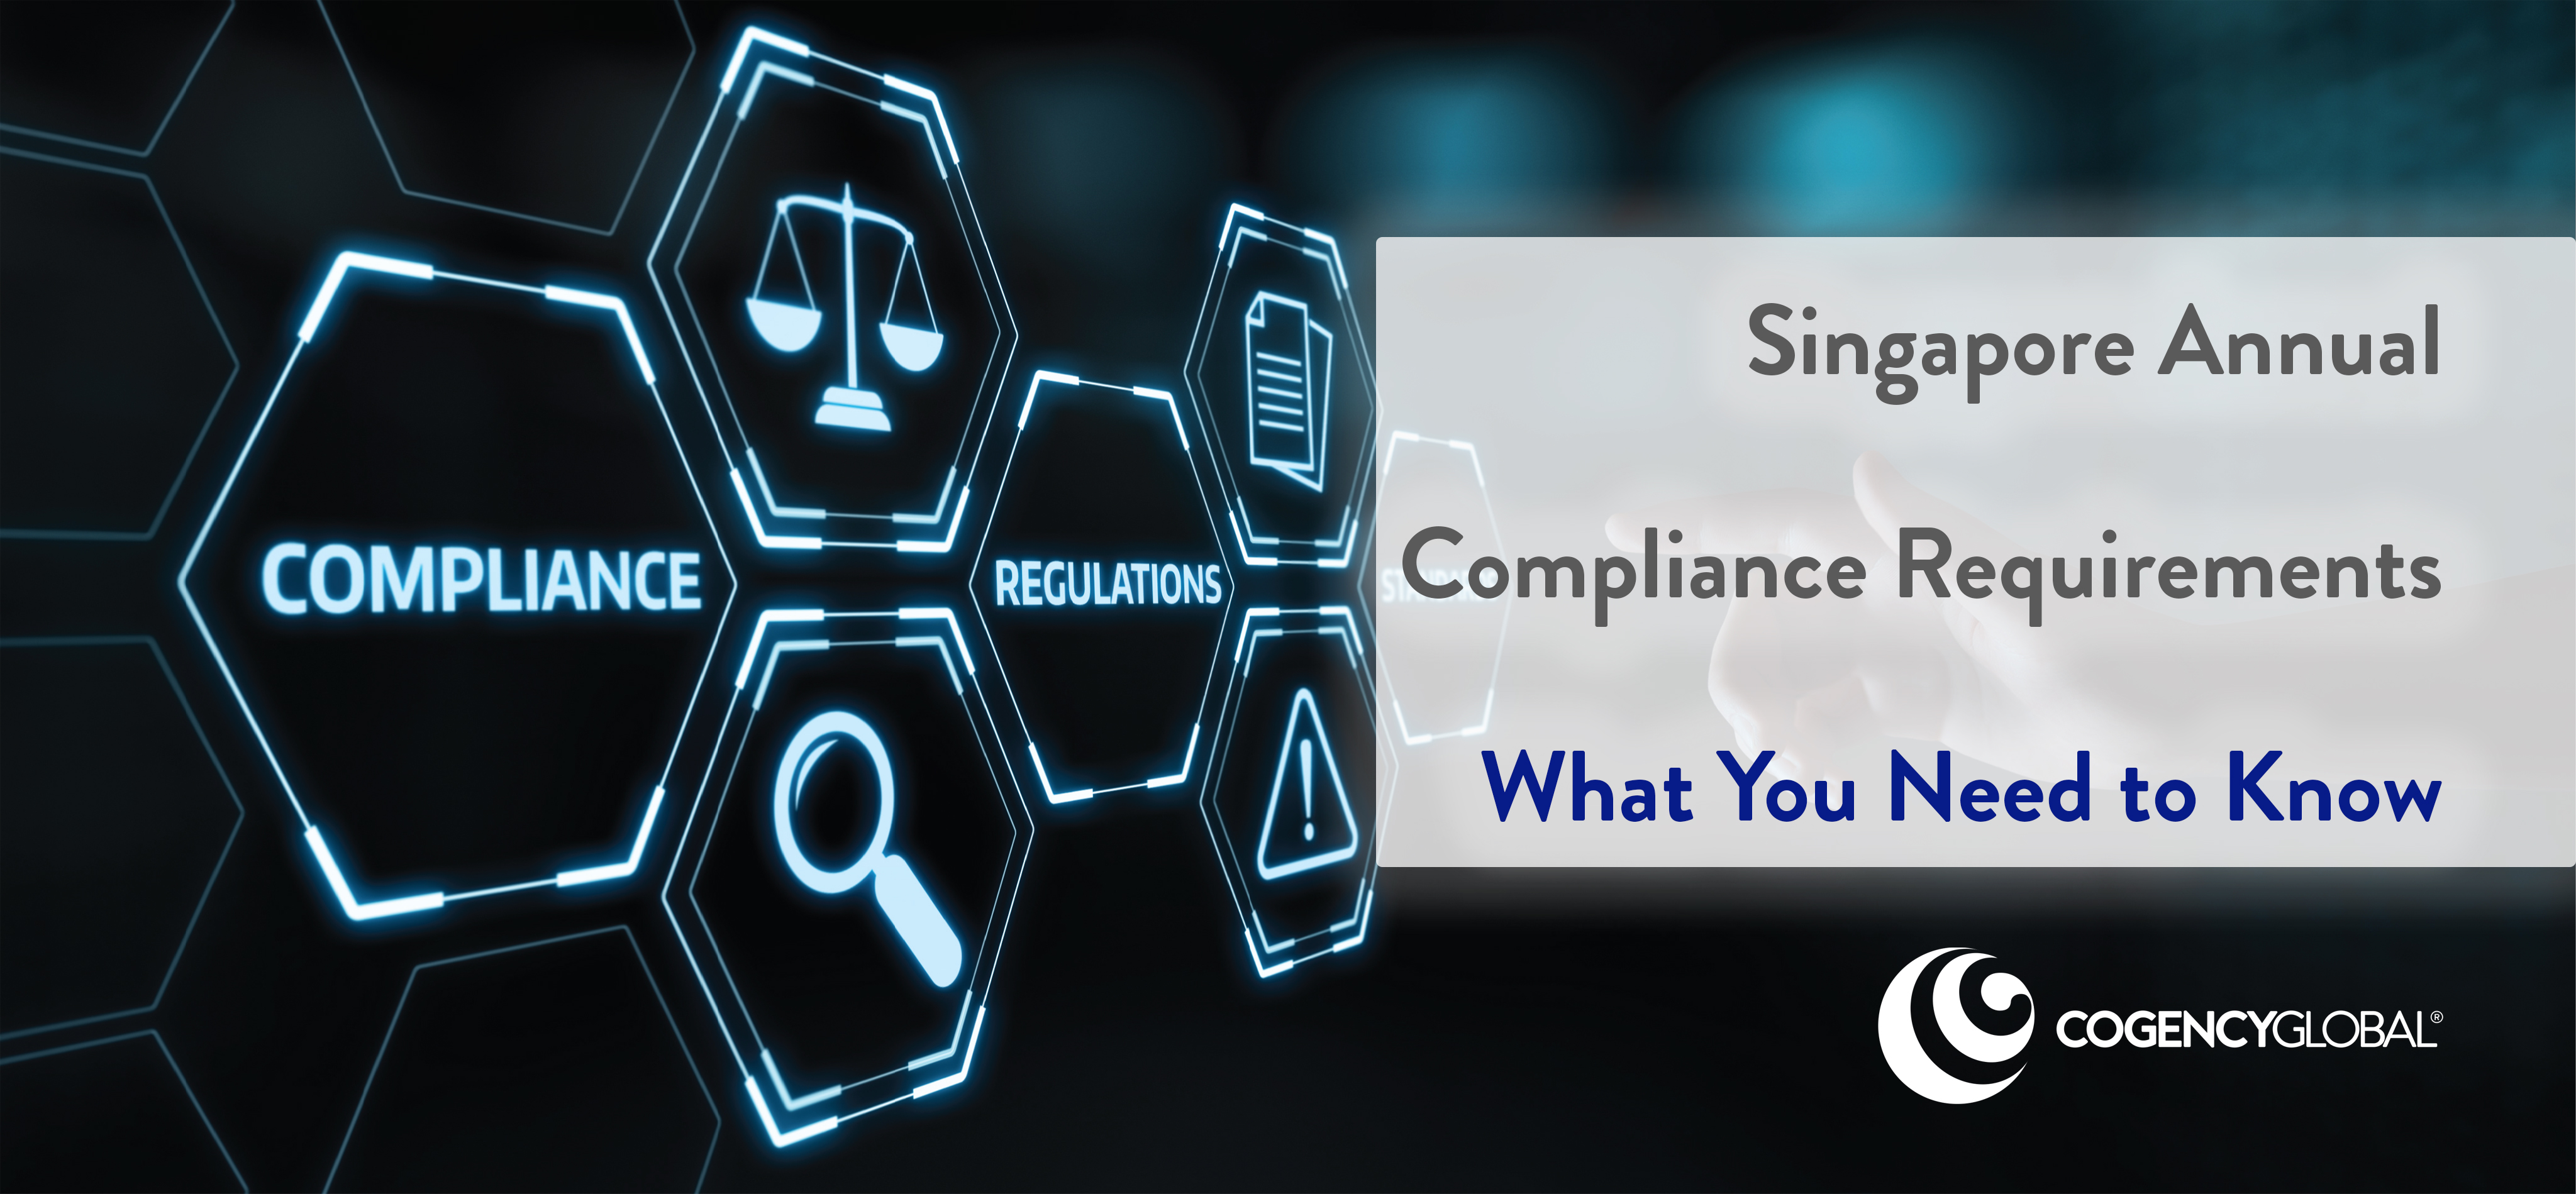 Singapore Annual Compliance Requirements: What You Need to Know